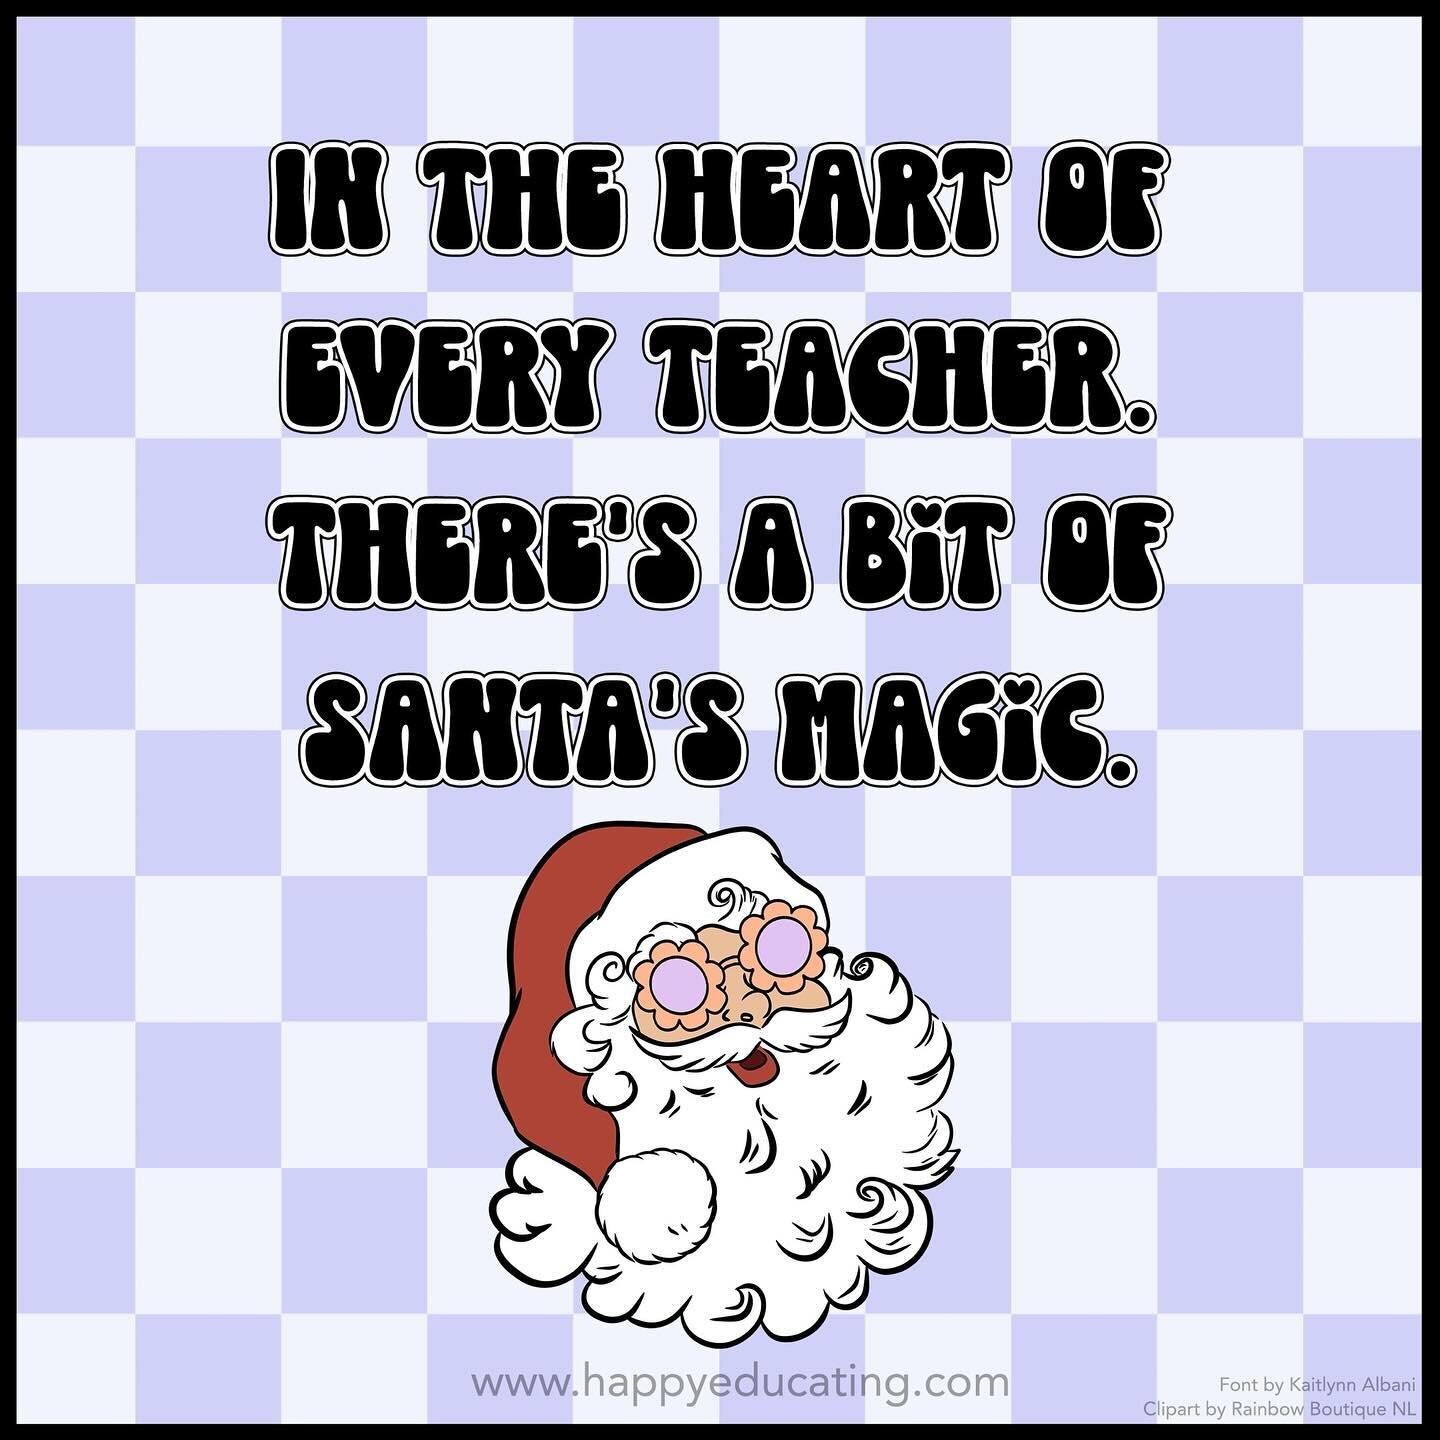 In every teacher&rsquo;s heart, there&rsquo;s a sprinkle of Santa&rsquo;s magic, making lessons merry and bright. Embracing the joy of creating wonder, fostering growth, and making memories that last a lifetime. Cheers to the educators who bring that